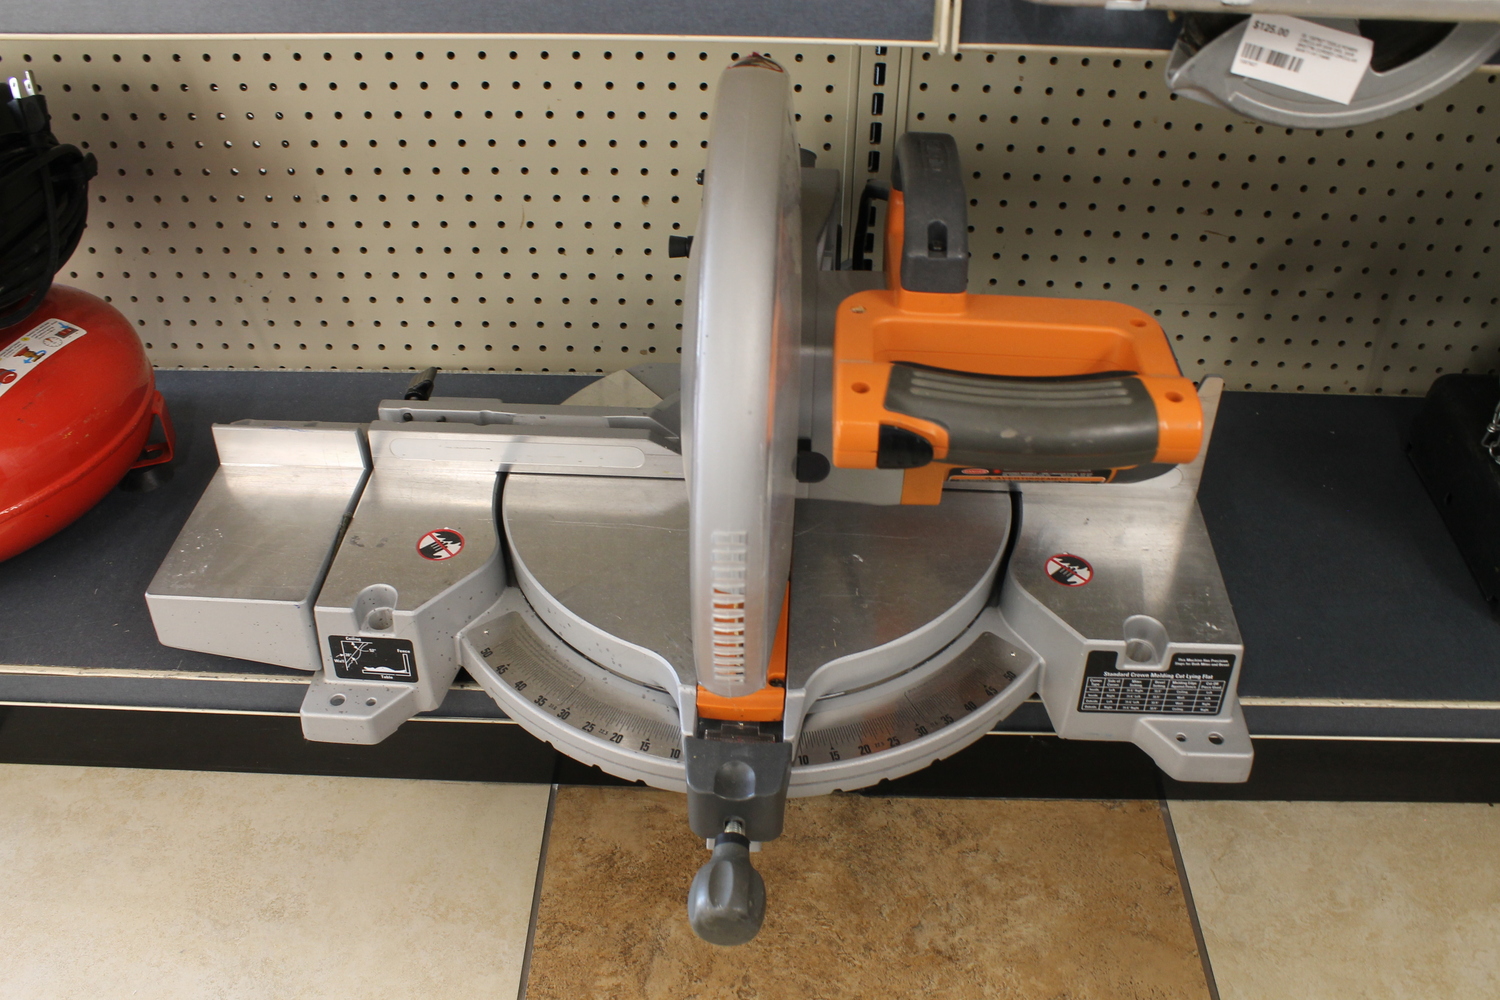 power miter saw ridgid ms1250lz1 (local pick up only)